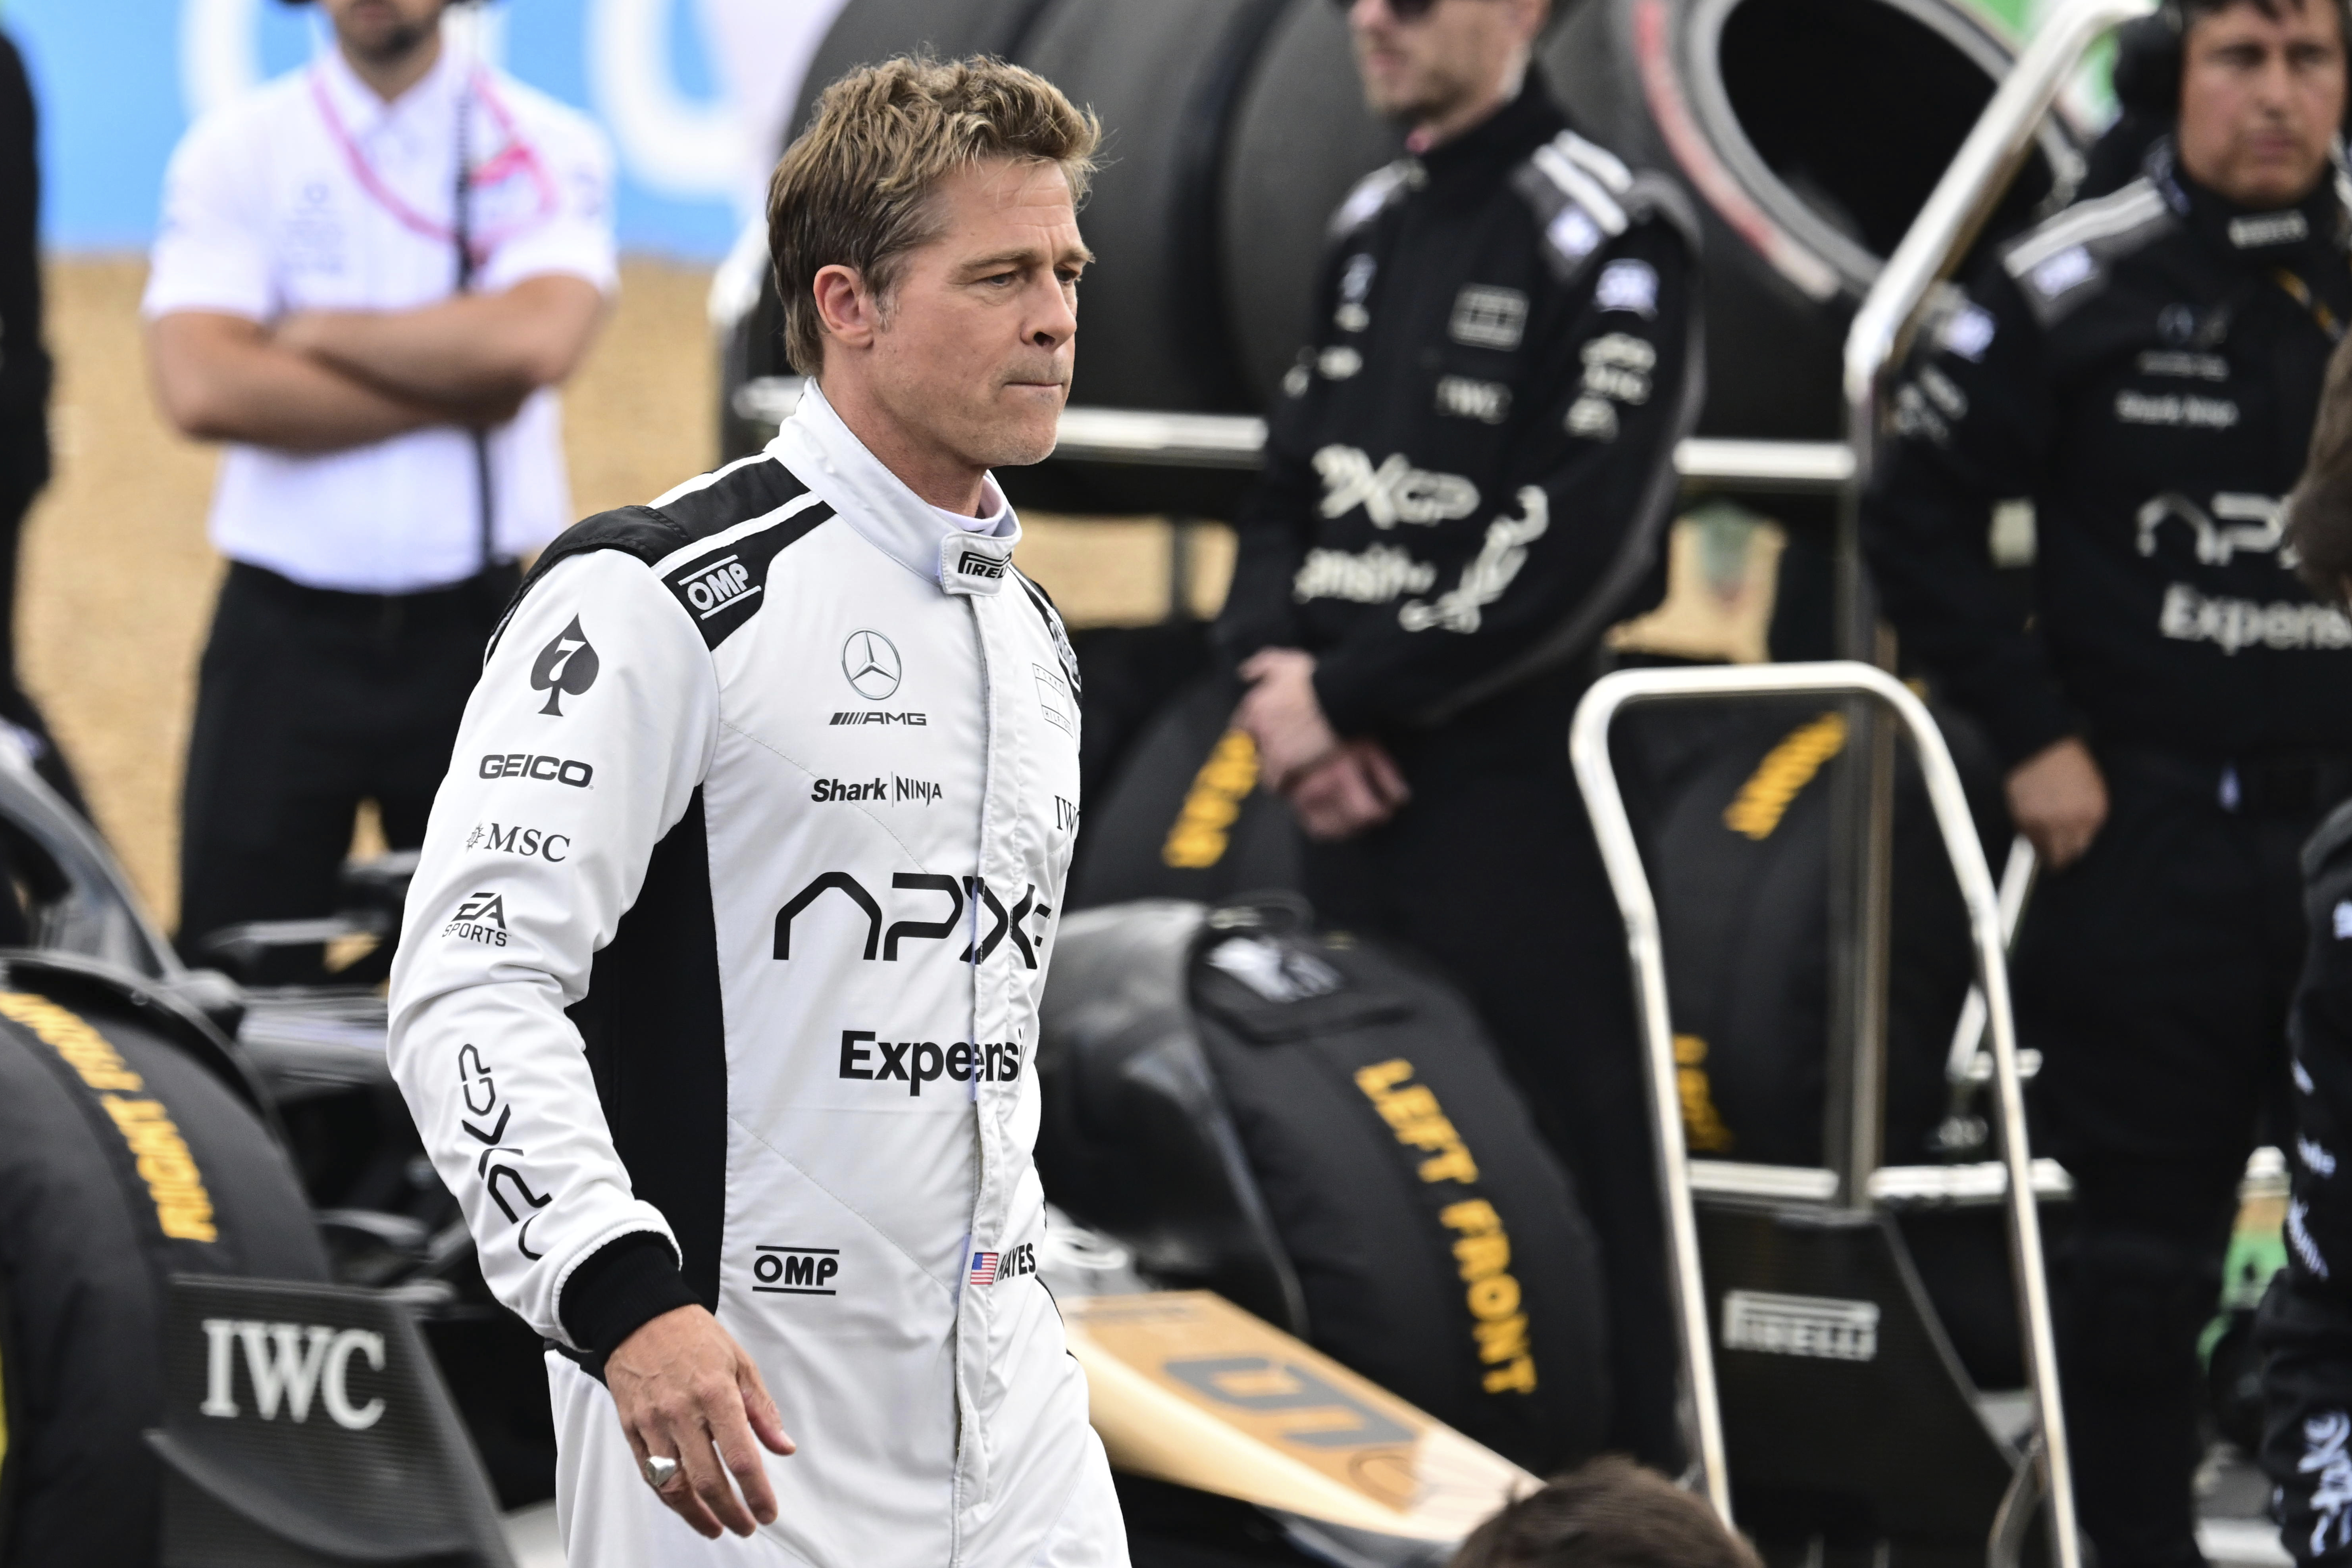 Brad Pitt's movie about Formula 1 will simply be called ‘F1'